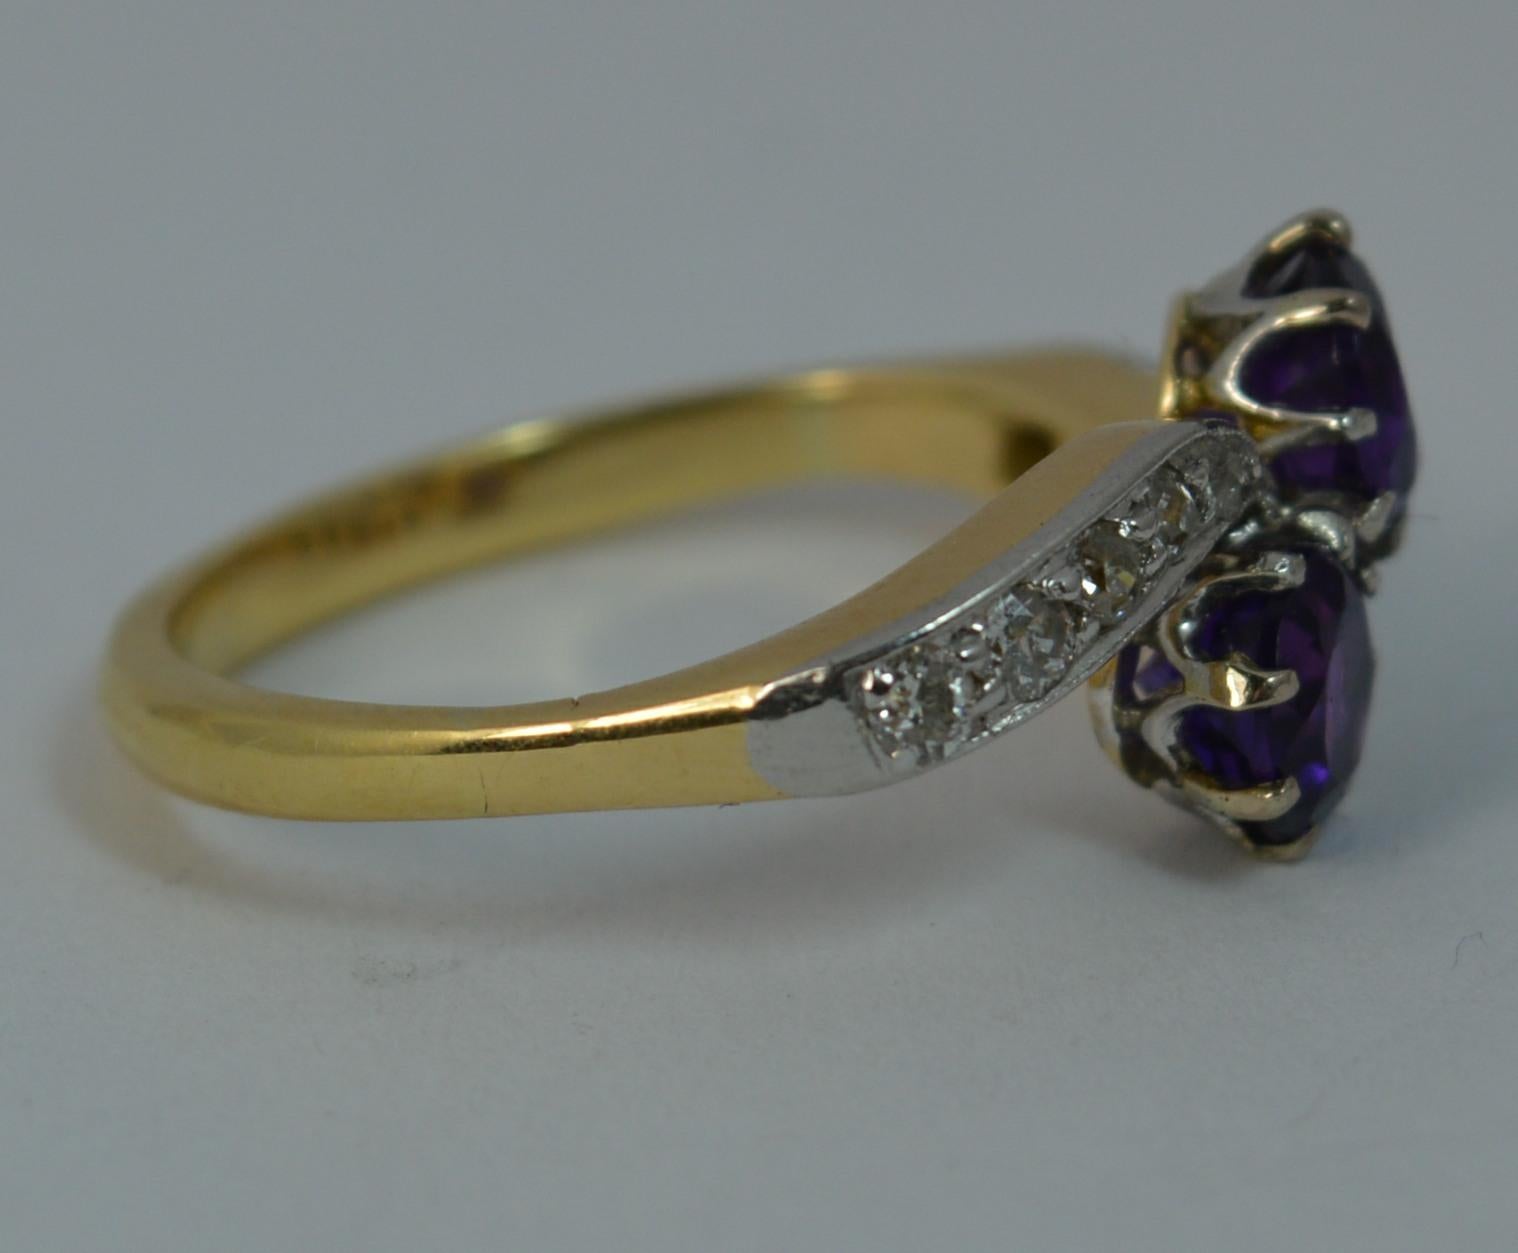 Antique 18 Carat Gold and Platinum Amethyst Toi et Moi Ring with Diamonds 4